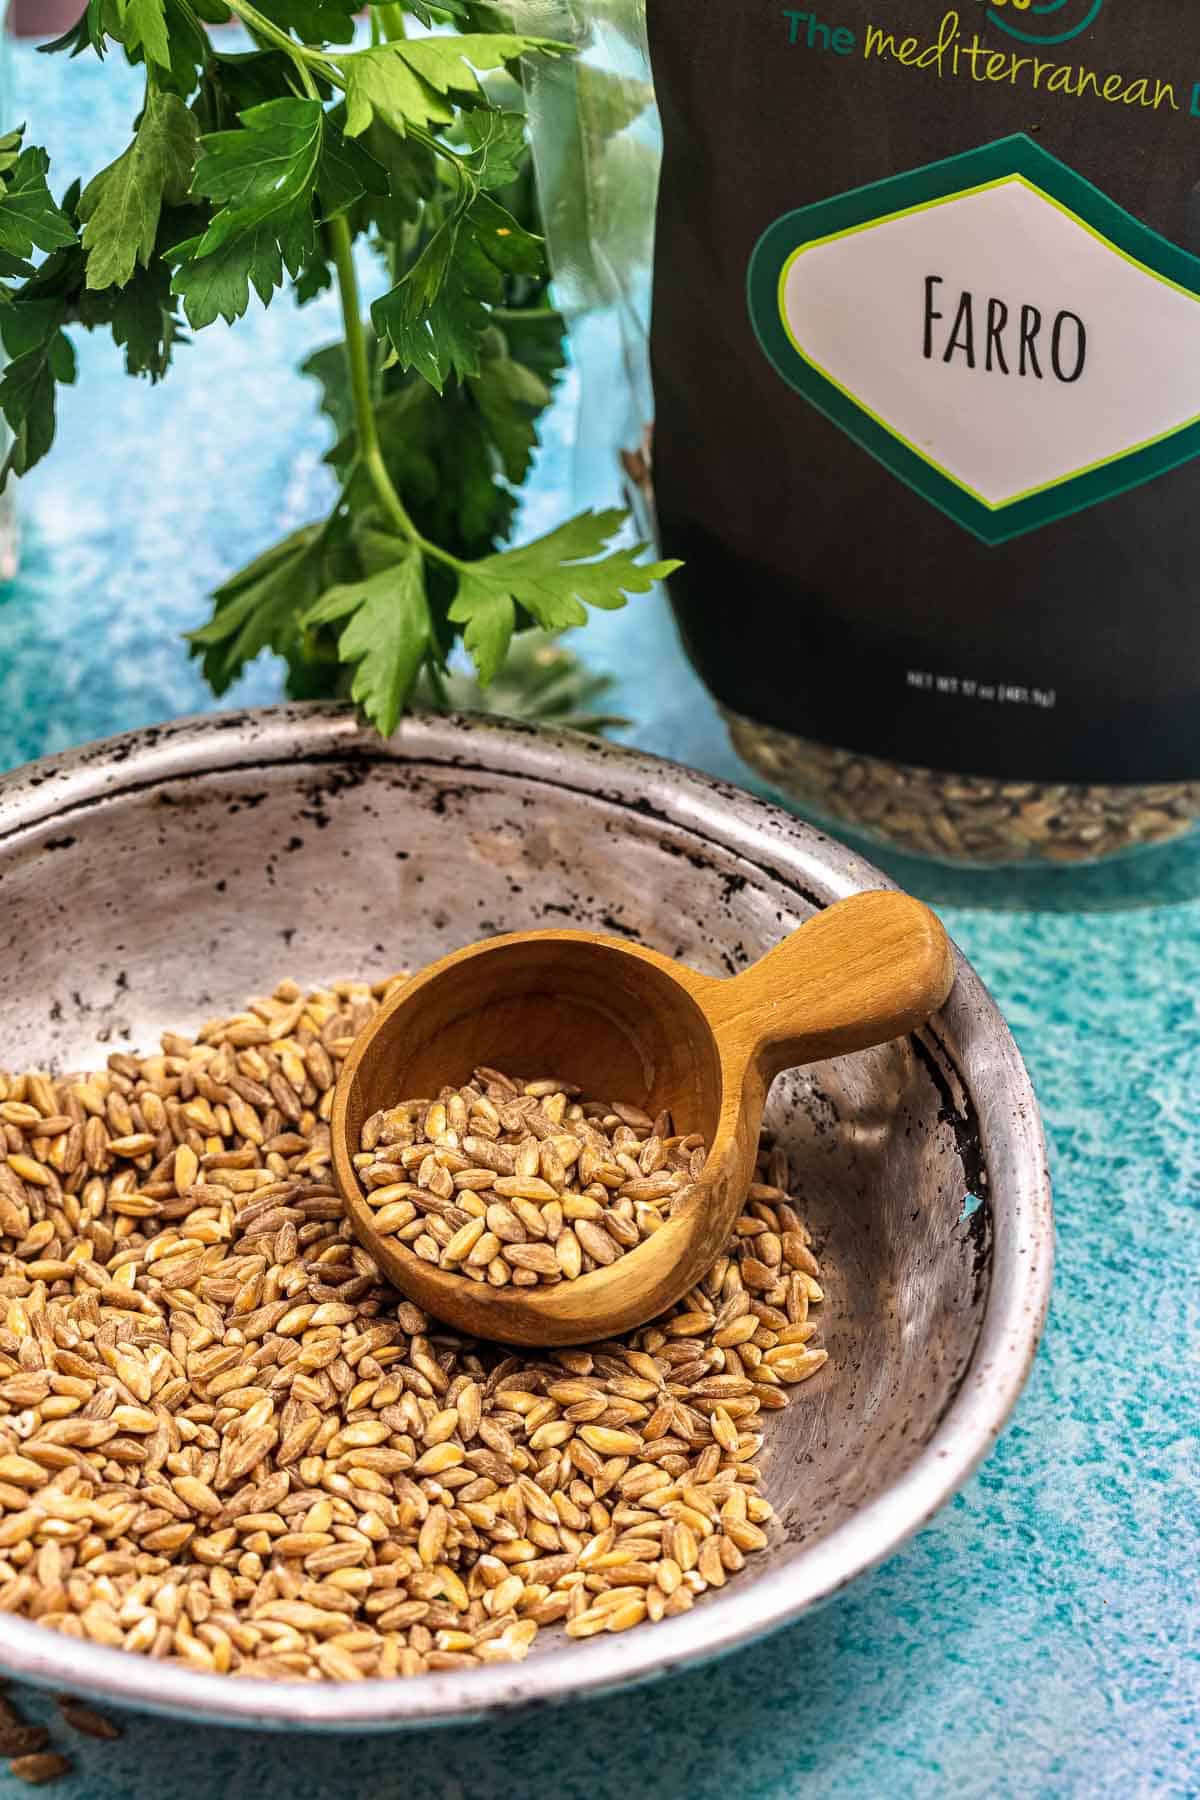 uncooked farro in a bowl being scooped with a wooden spoon in front of a bag of farro and some parsley.